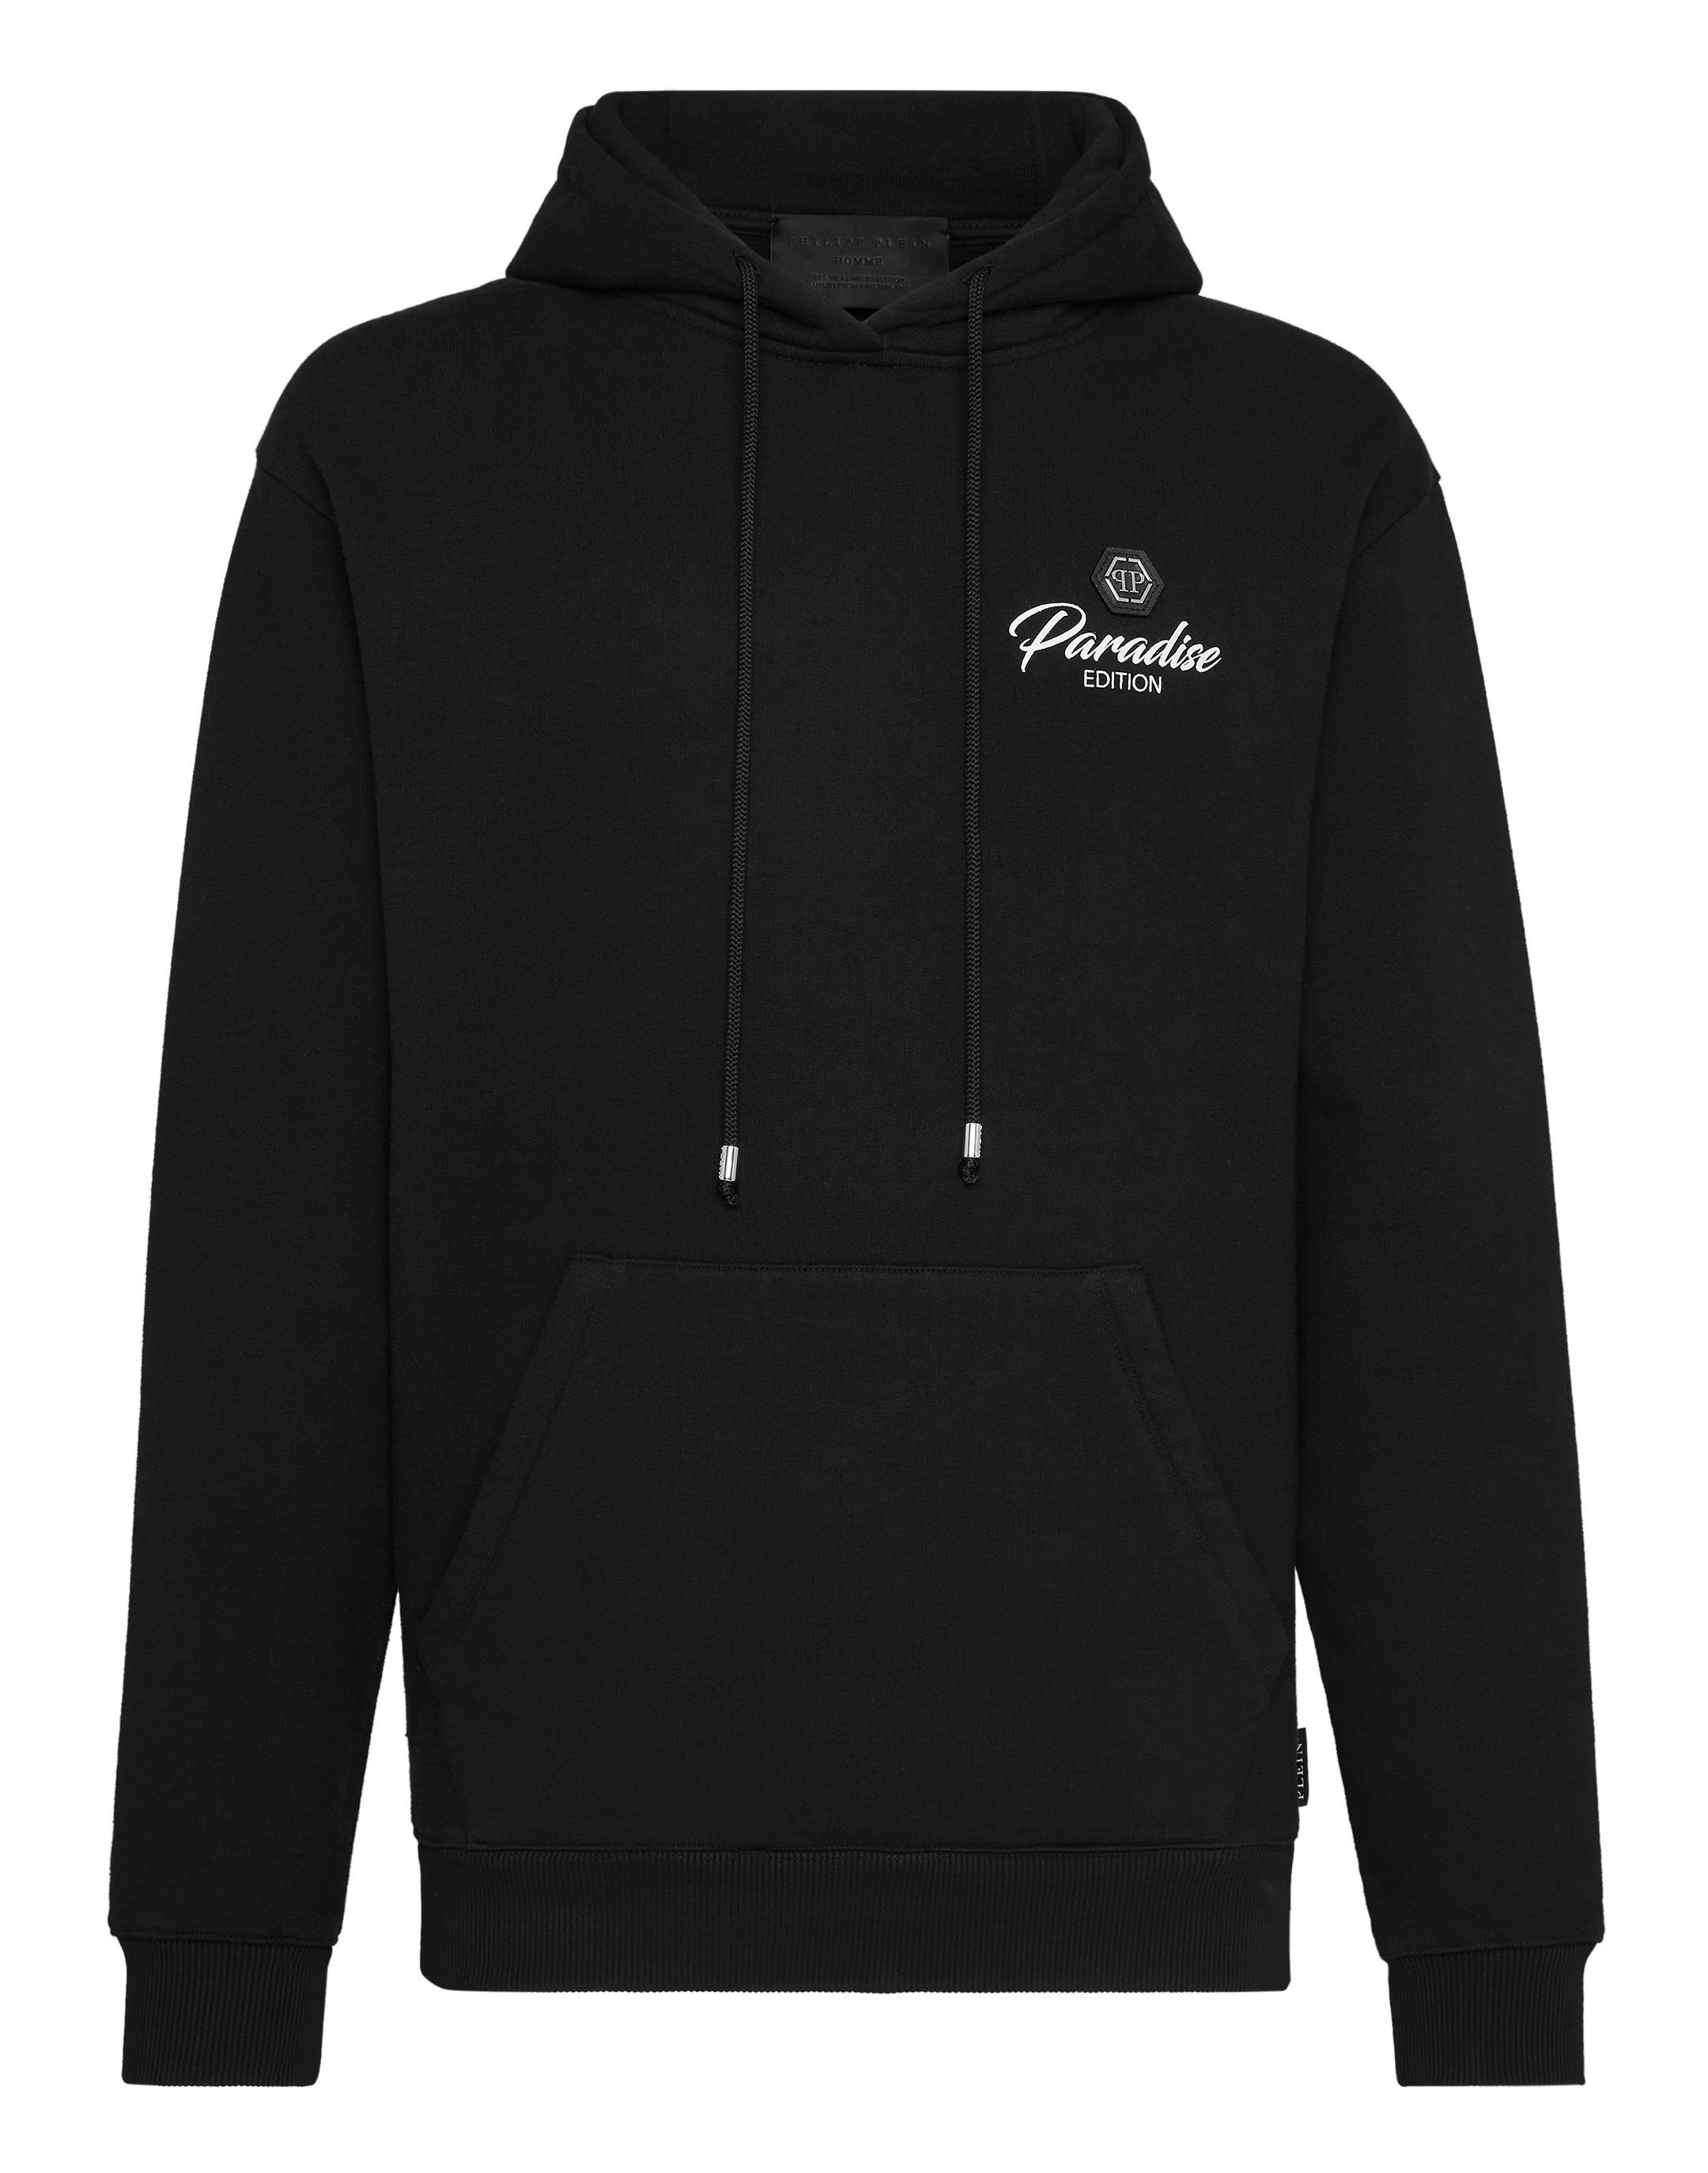 Hoodie sweatshirt Paradise Panther Edition | Philipp Plein Outlet